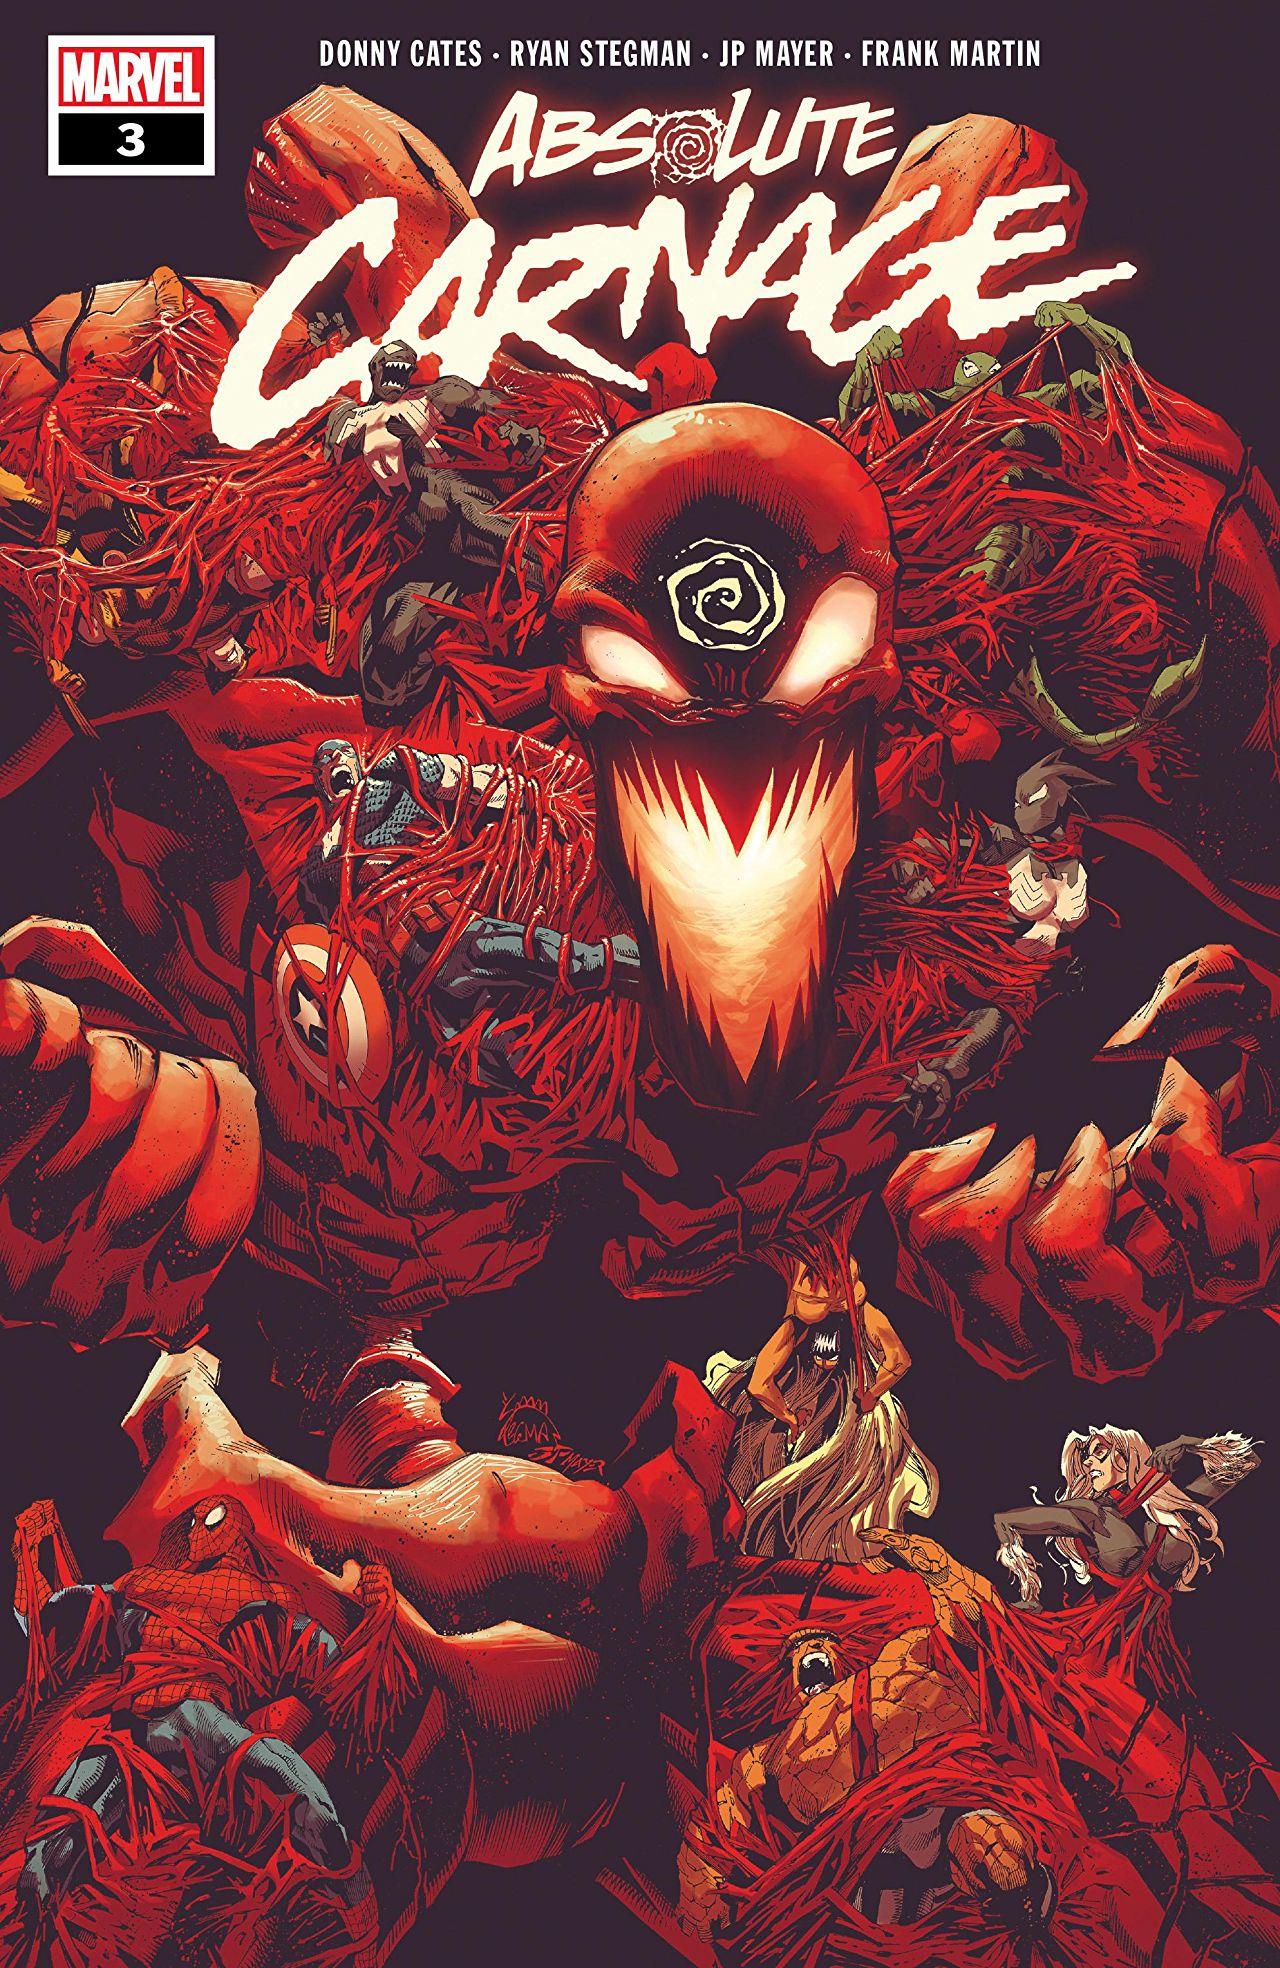 Absolute Carnage Vol. 1 #3